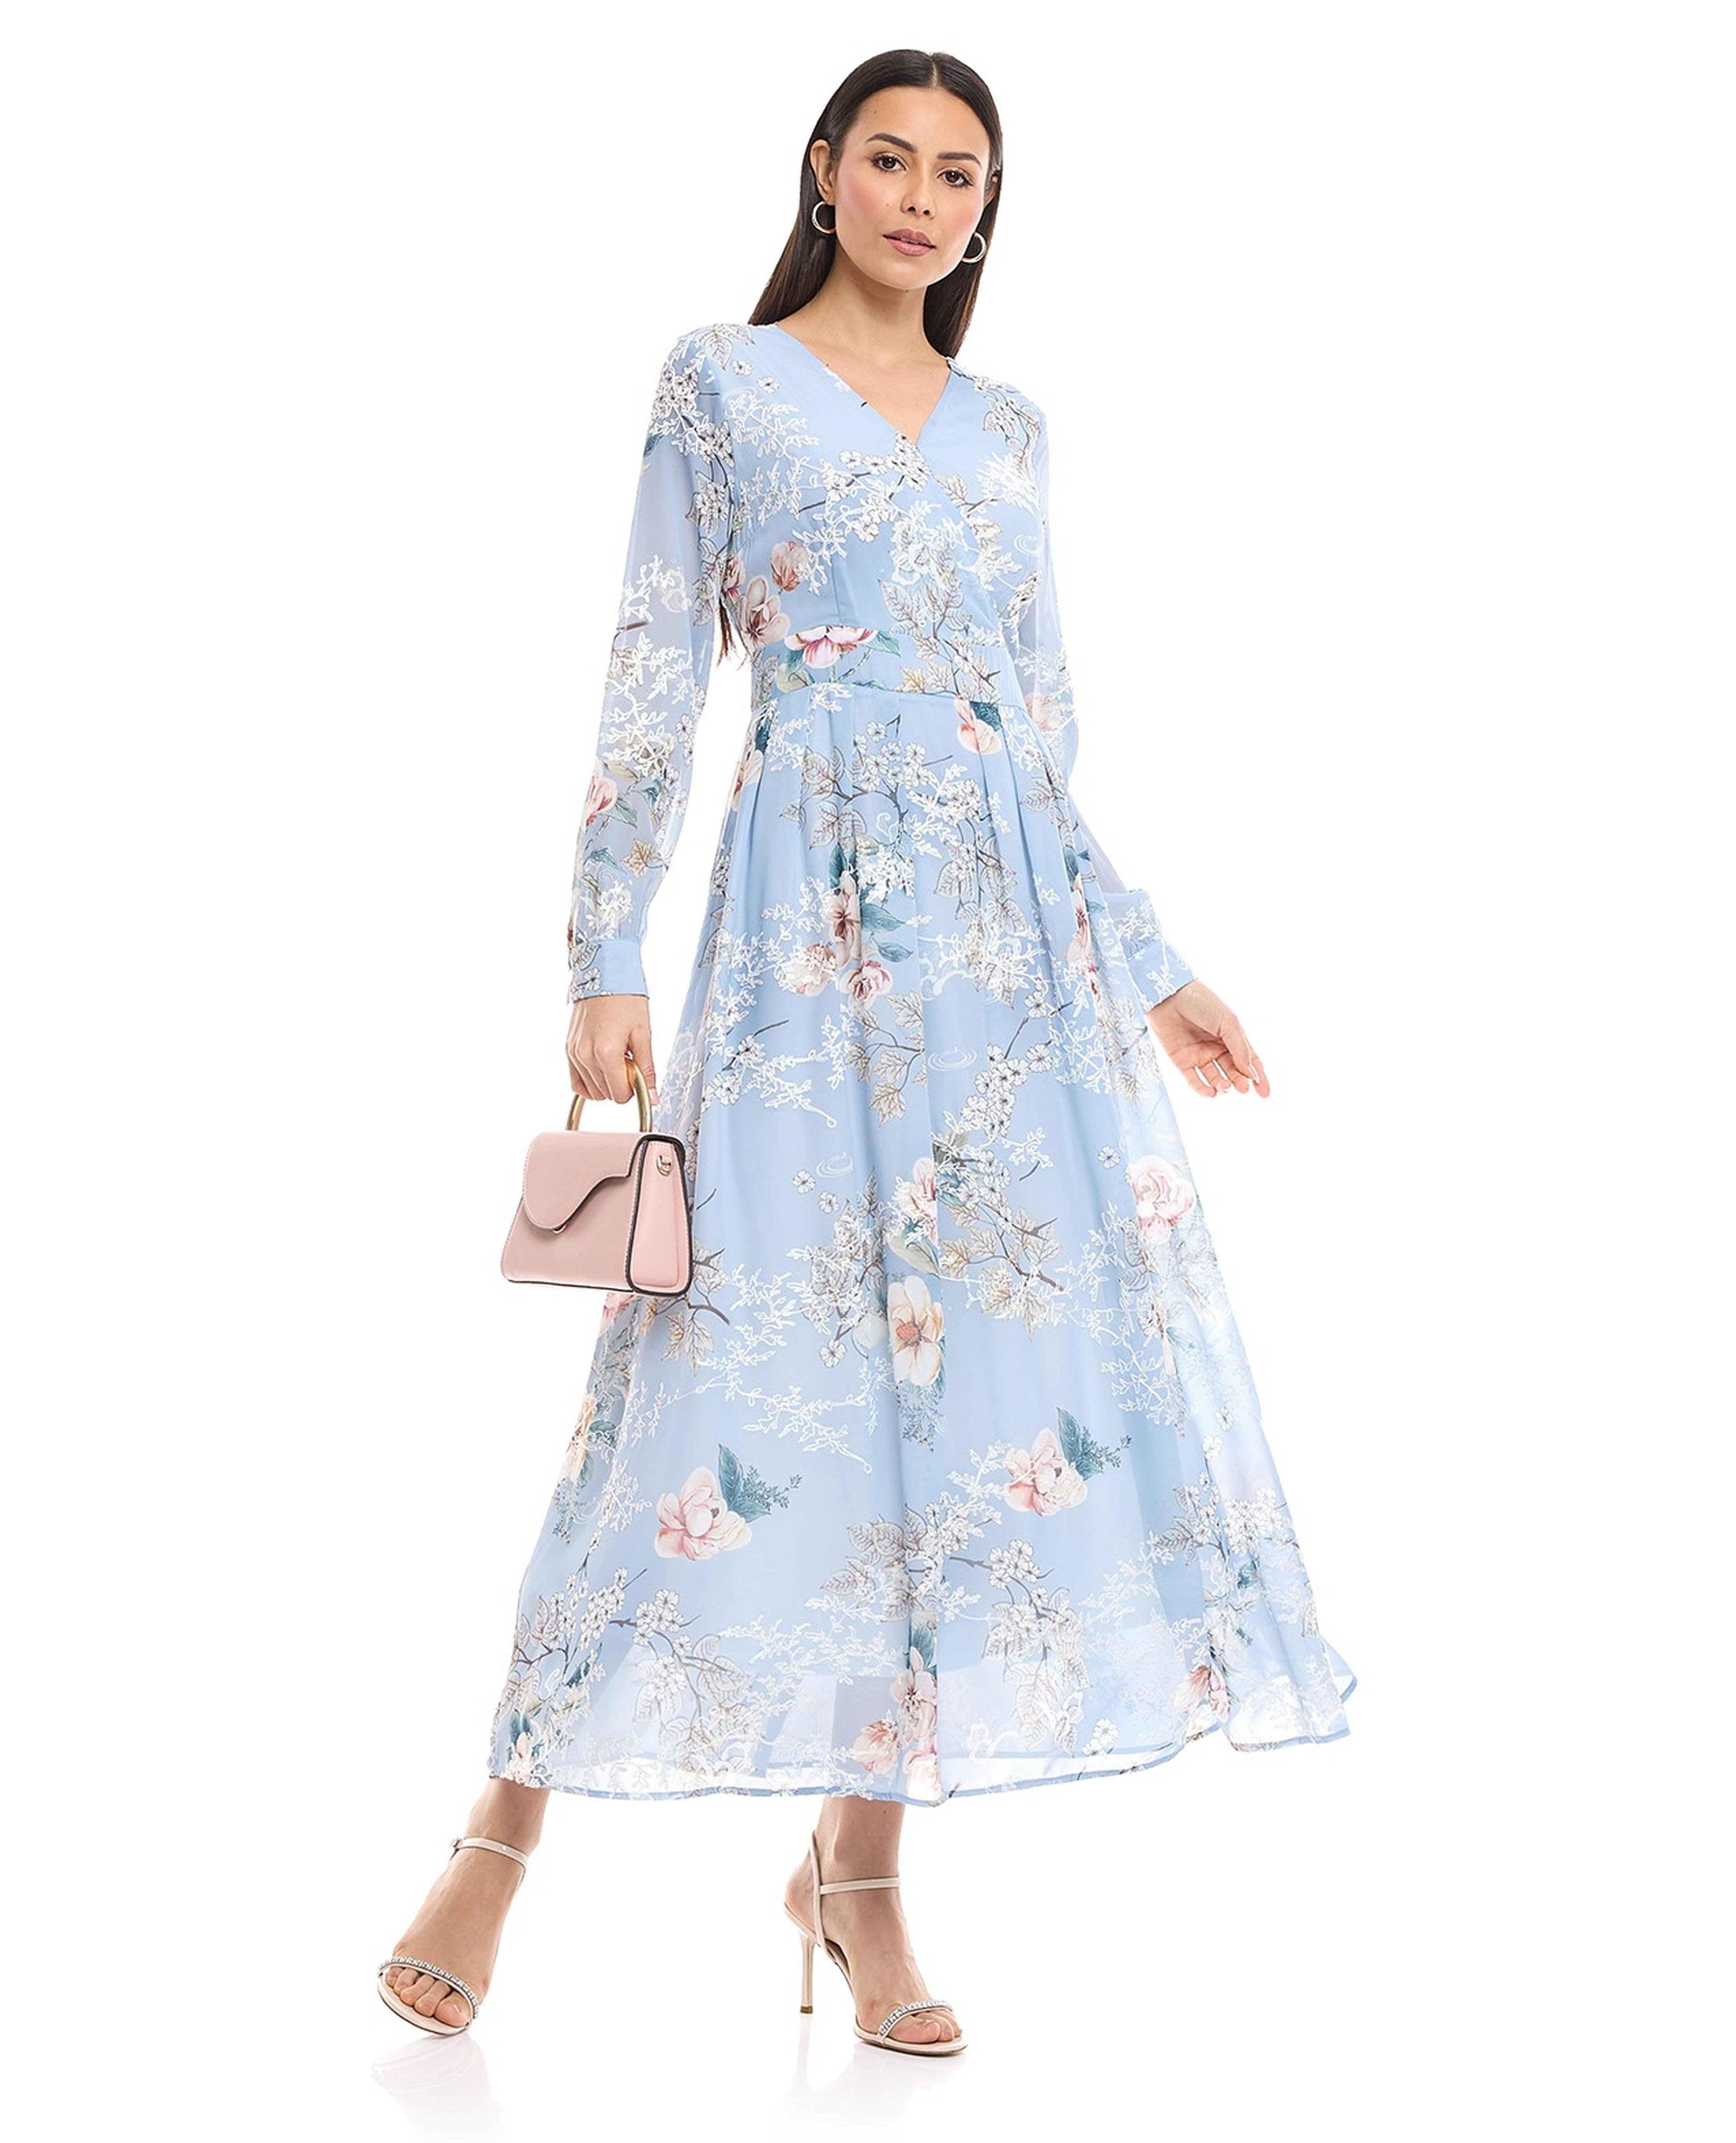 Floral Print Flared Dress with V-Neck and Long Sleeves